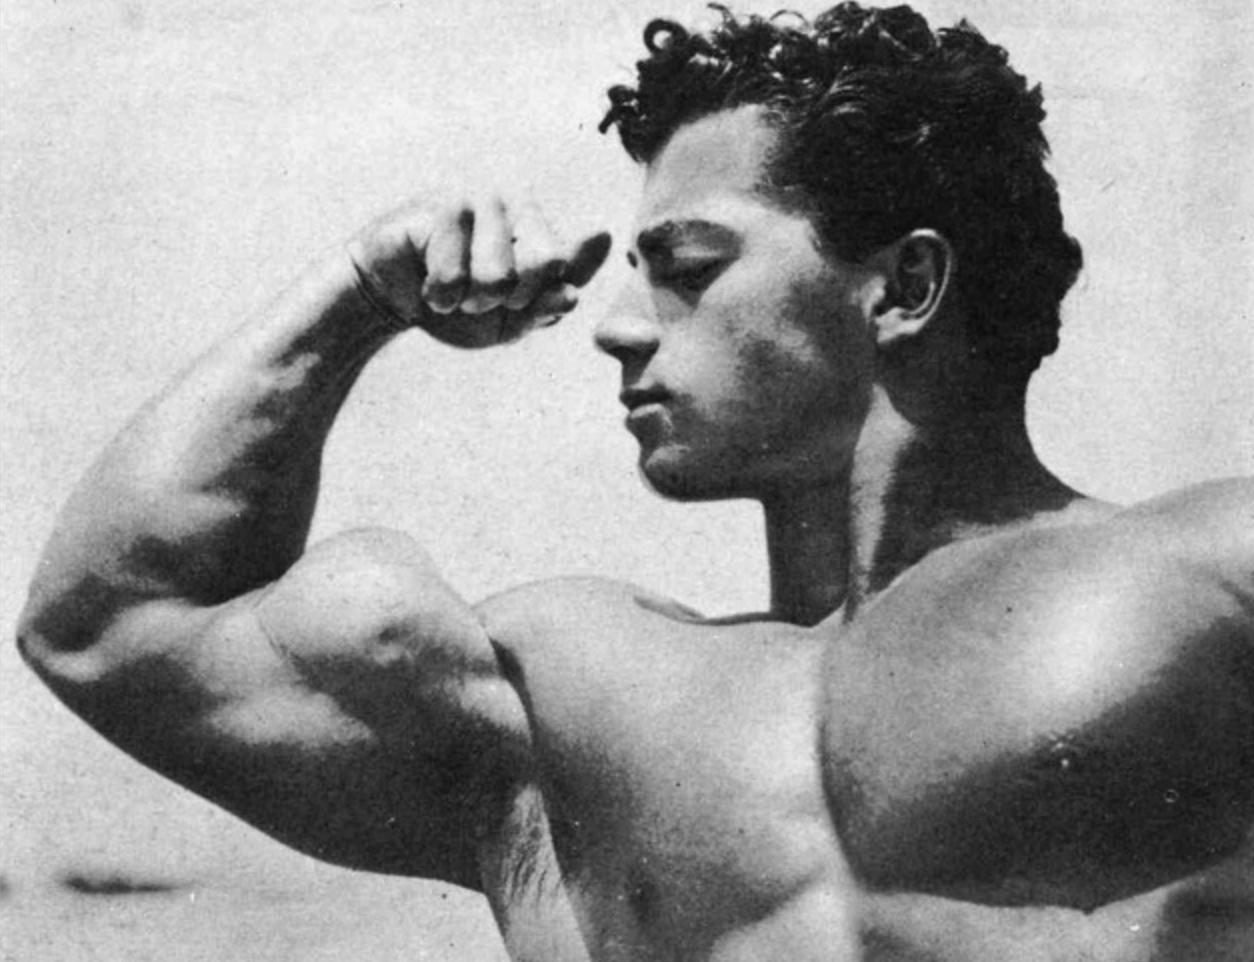 Marvin Eder - a bodybuilder and strength athlete from the early 50s. He weighed 190lbs at 5'7," and benched 515lbs.